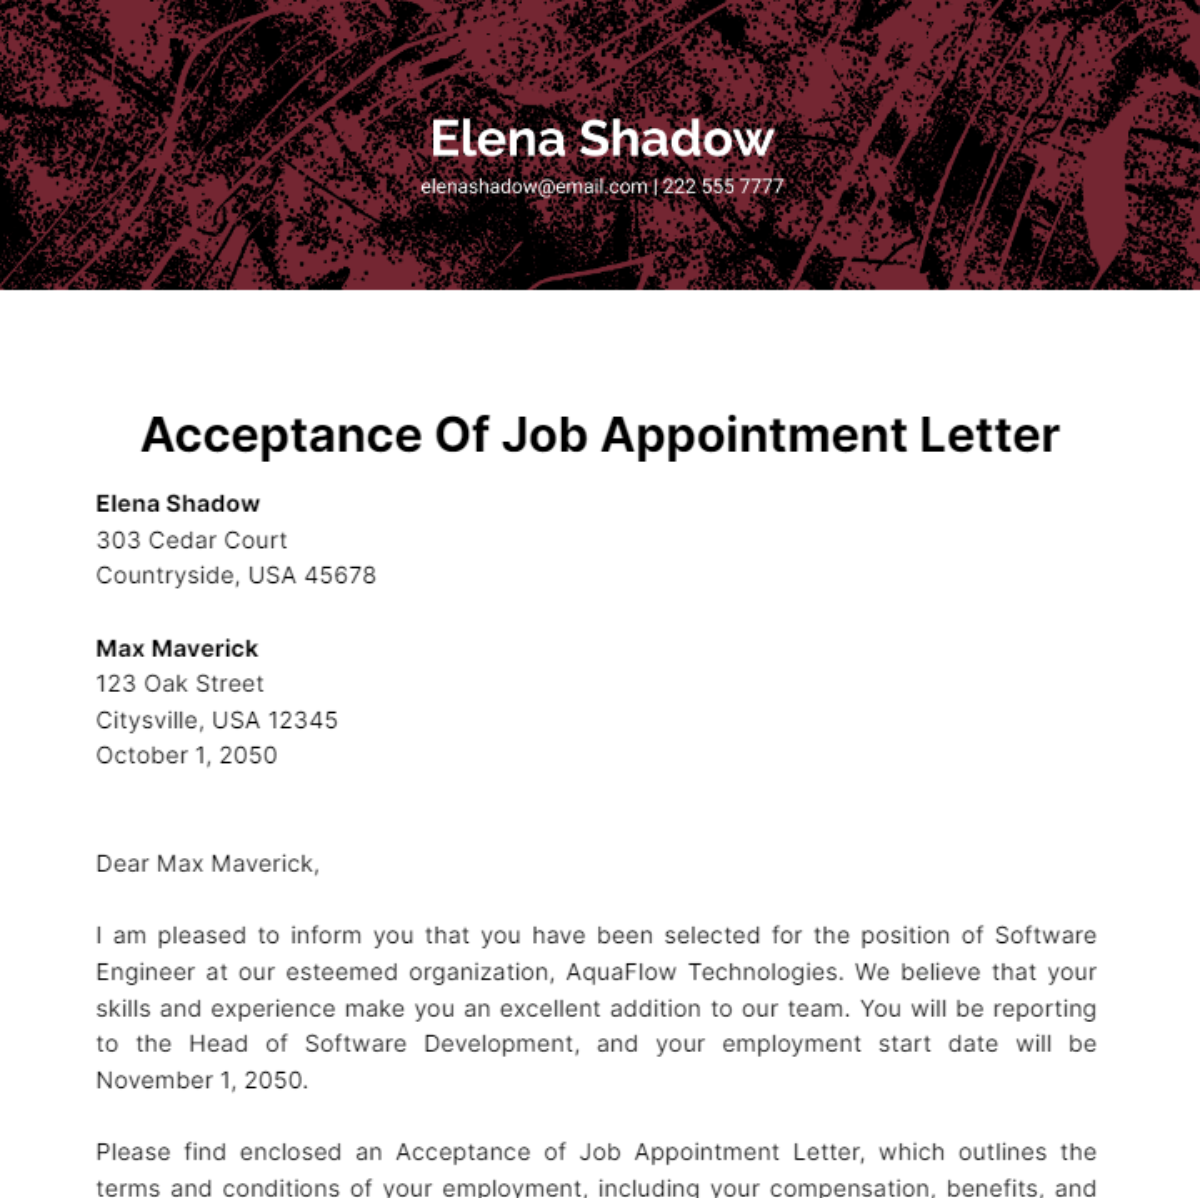 Acceptance Of Job Appointment Letter Template